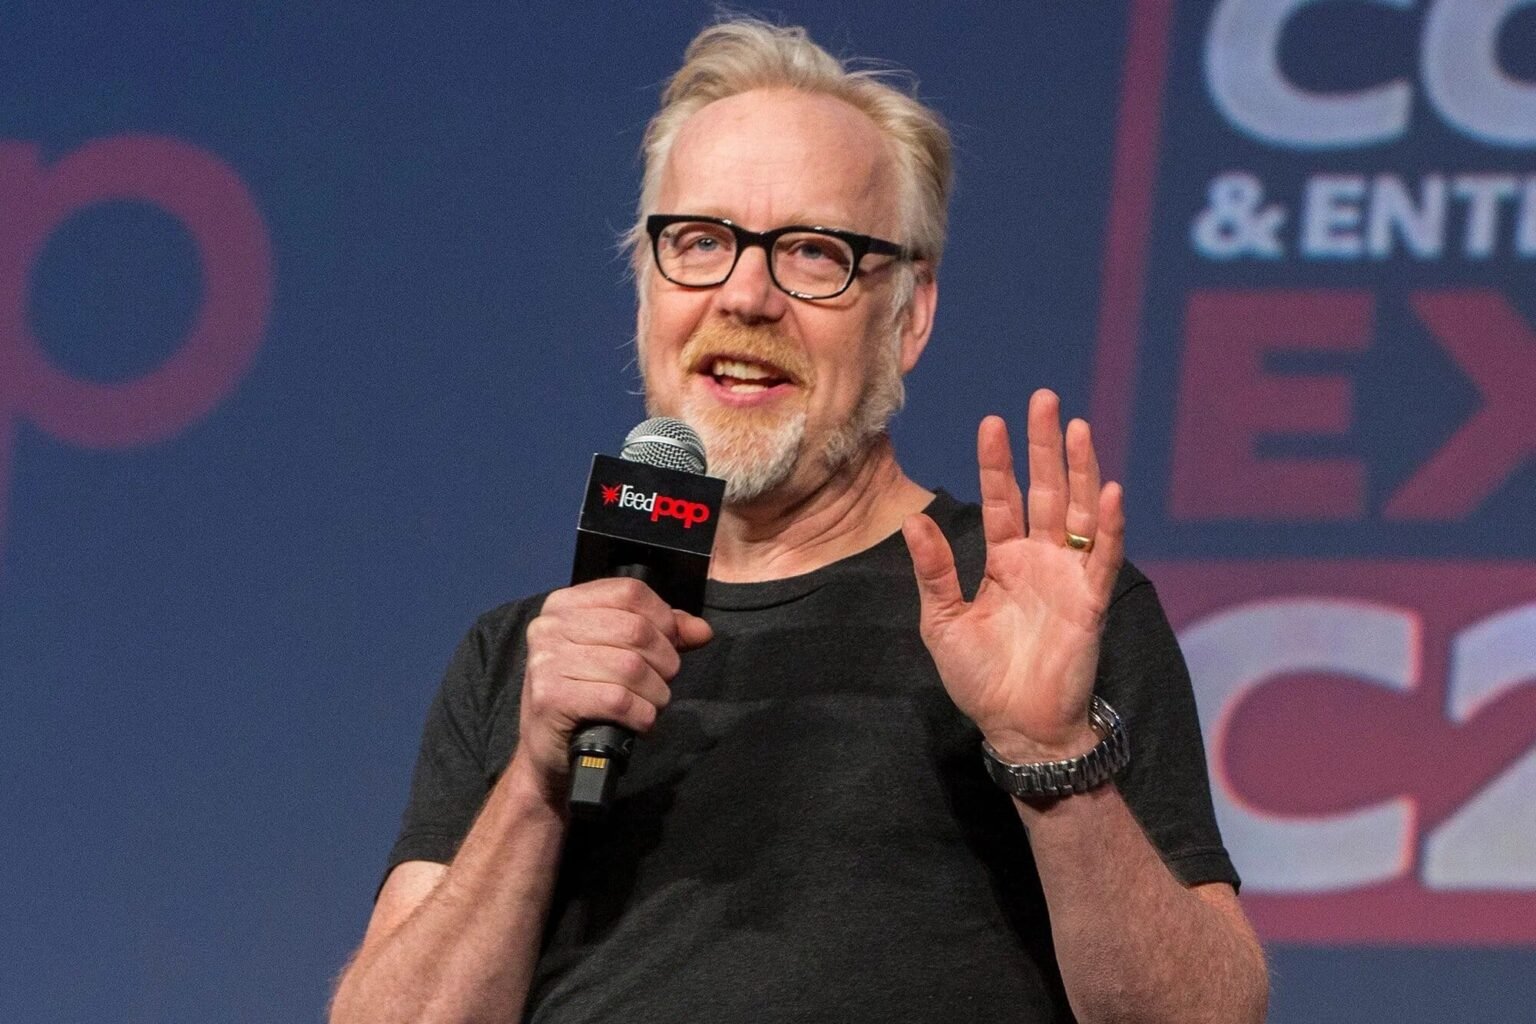 Through the 2000s, Discovery Channel’s 'Mythbusters' was a staple on TV. Here’s what we know about the allegations against Adam Savage.